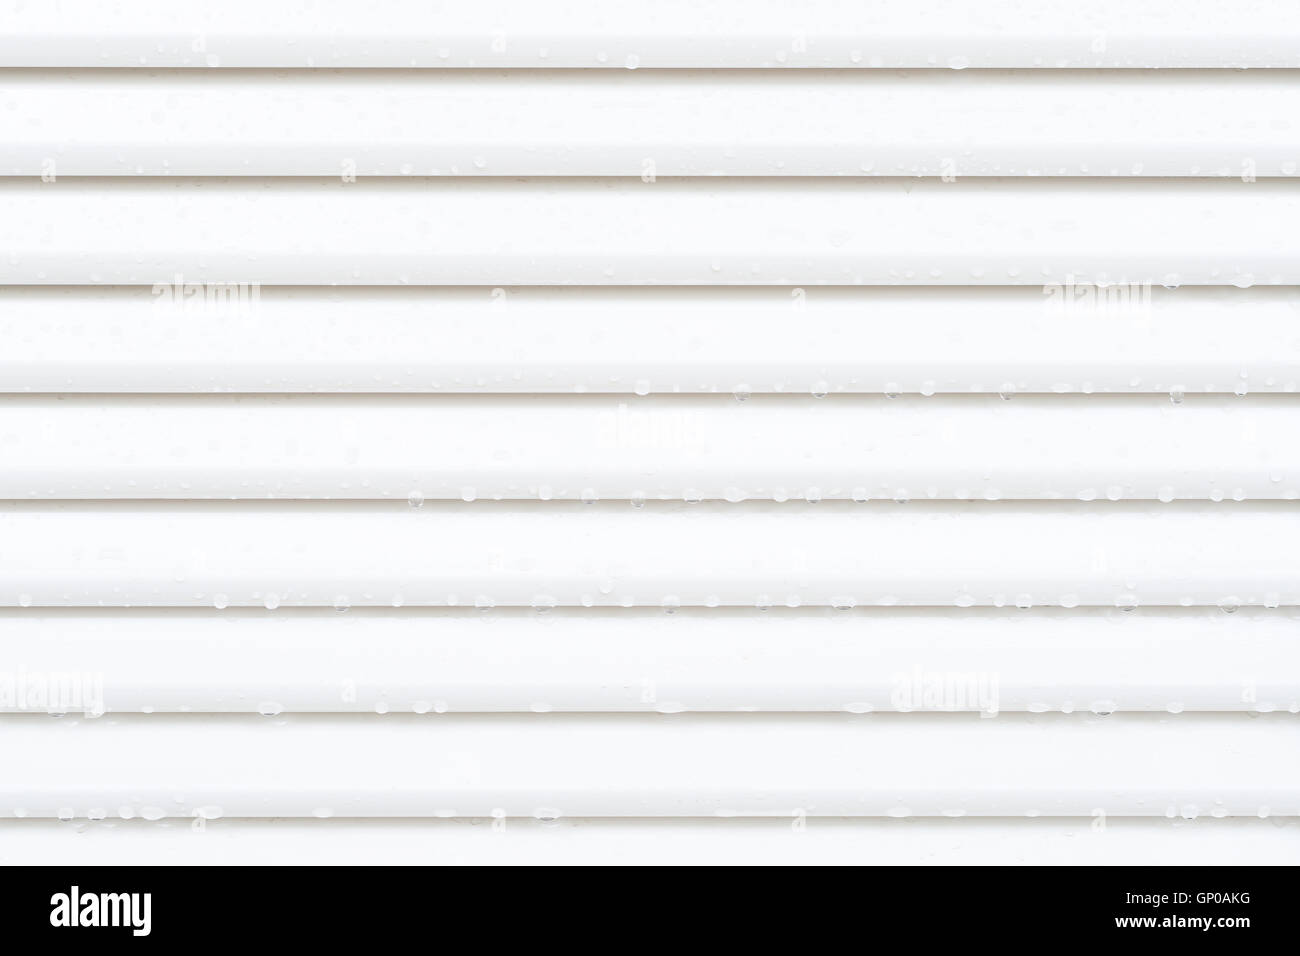 White aluminum awning with water rain drops. Outdoor white louver vents. Stock Photo